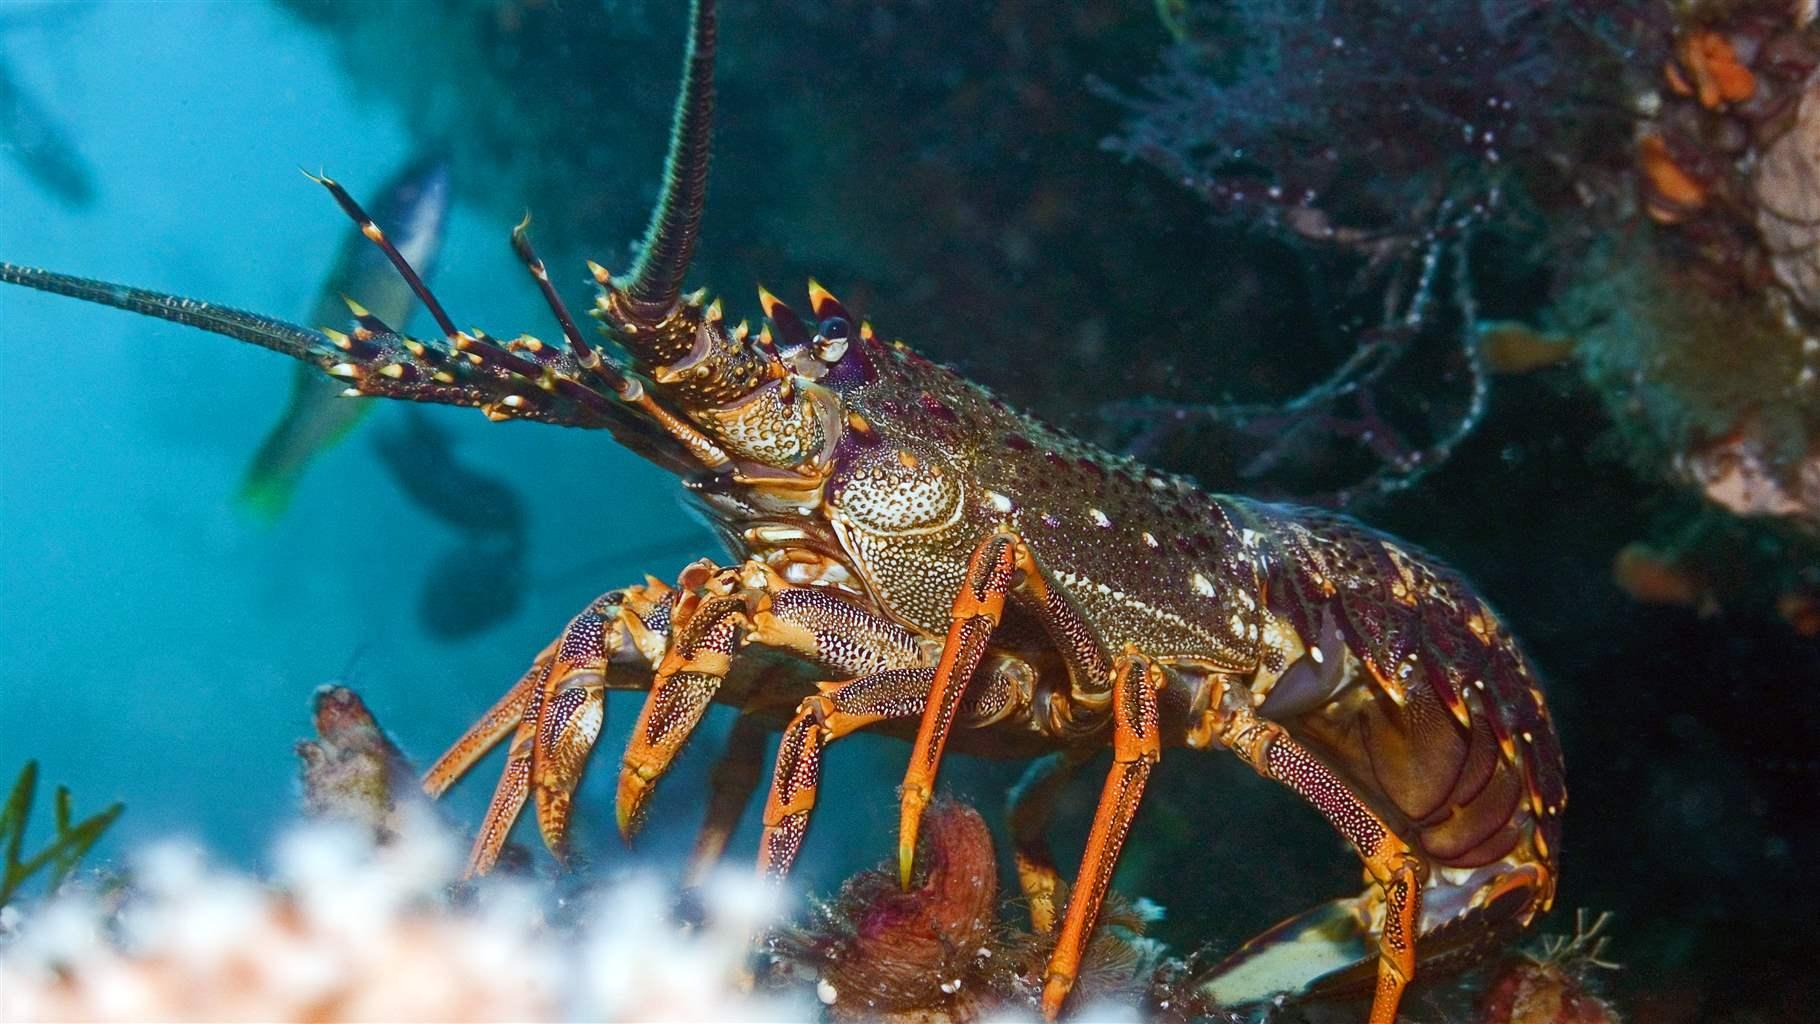 The giant spiny lobster